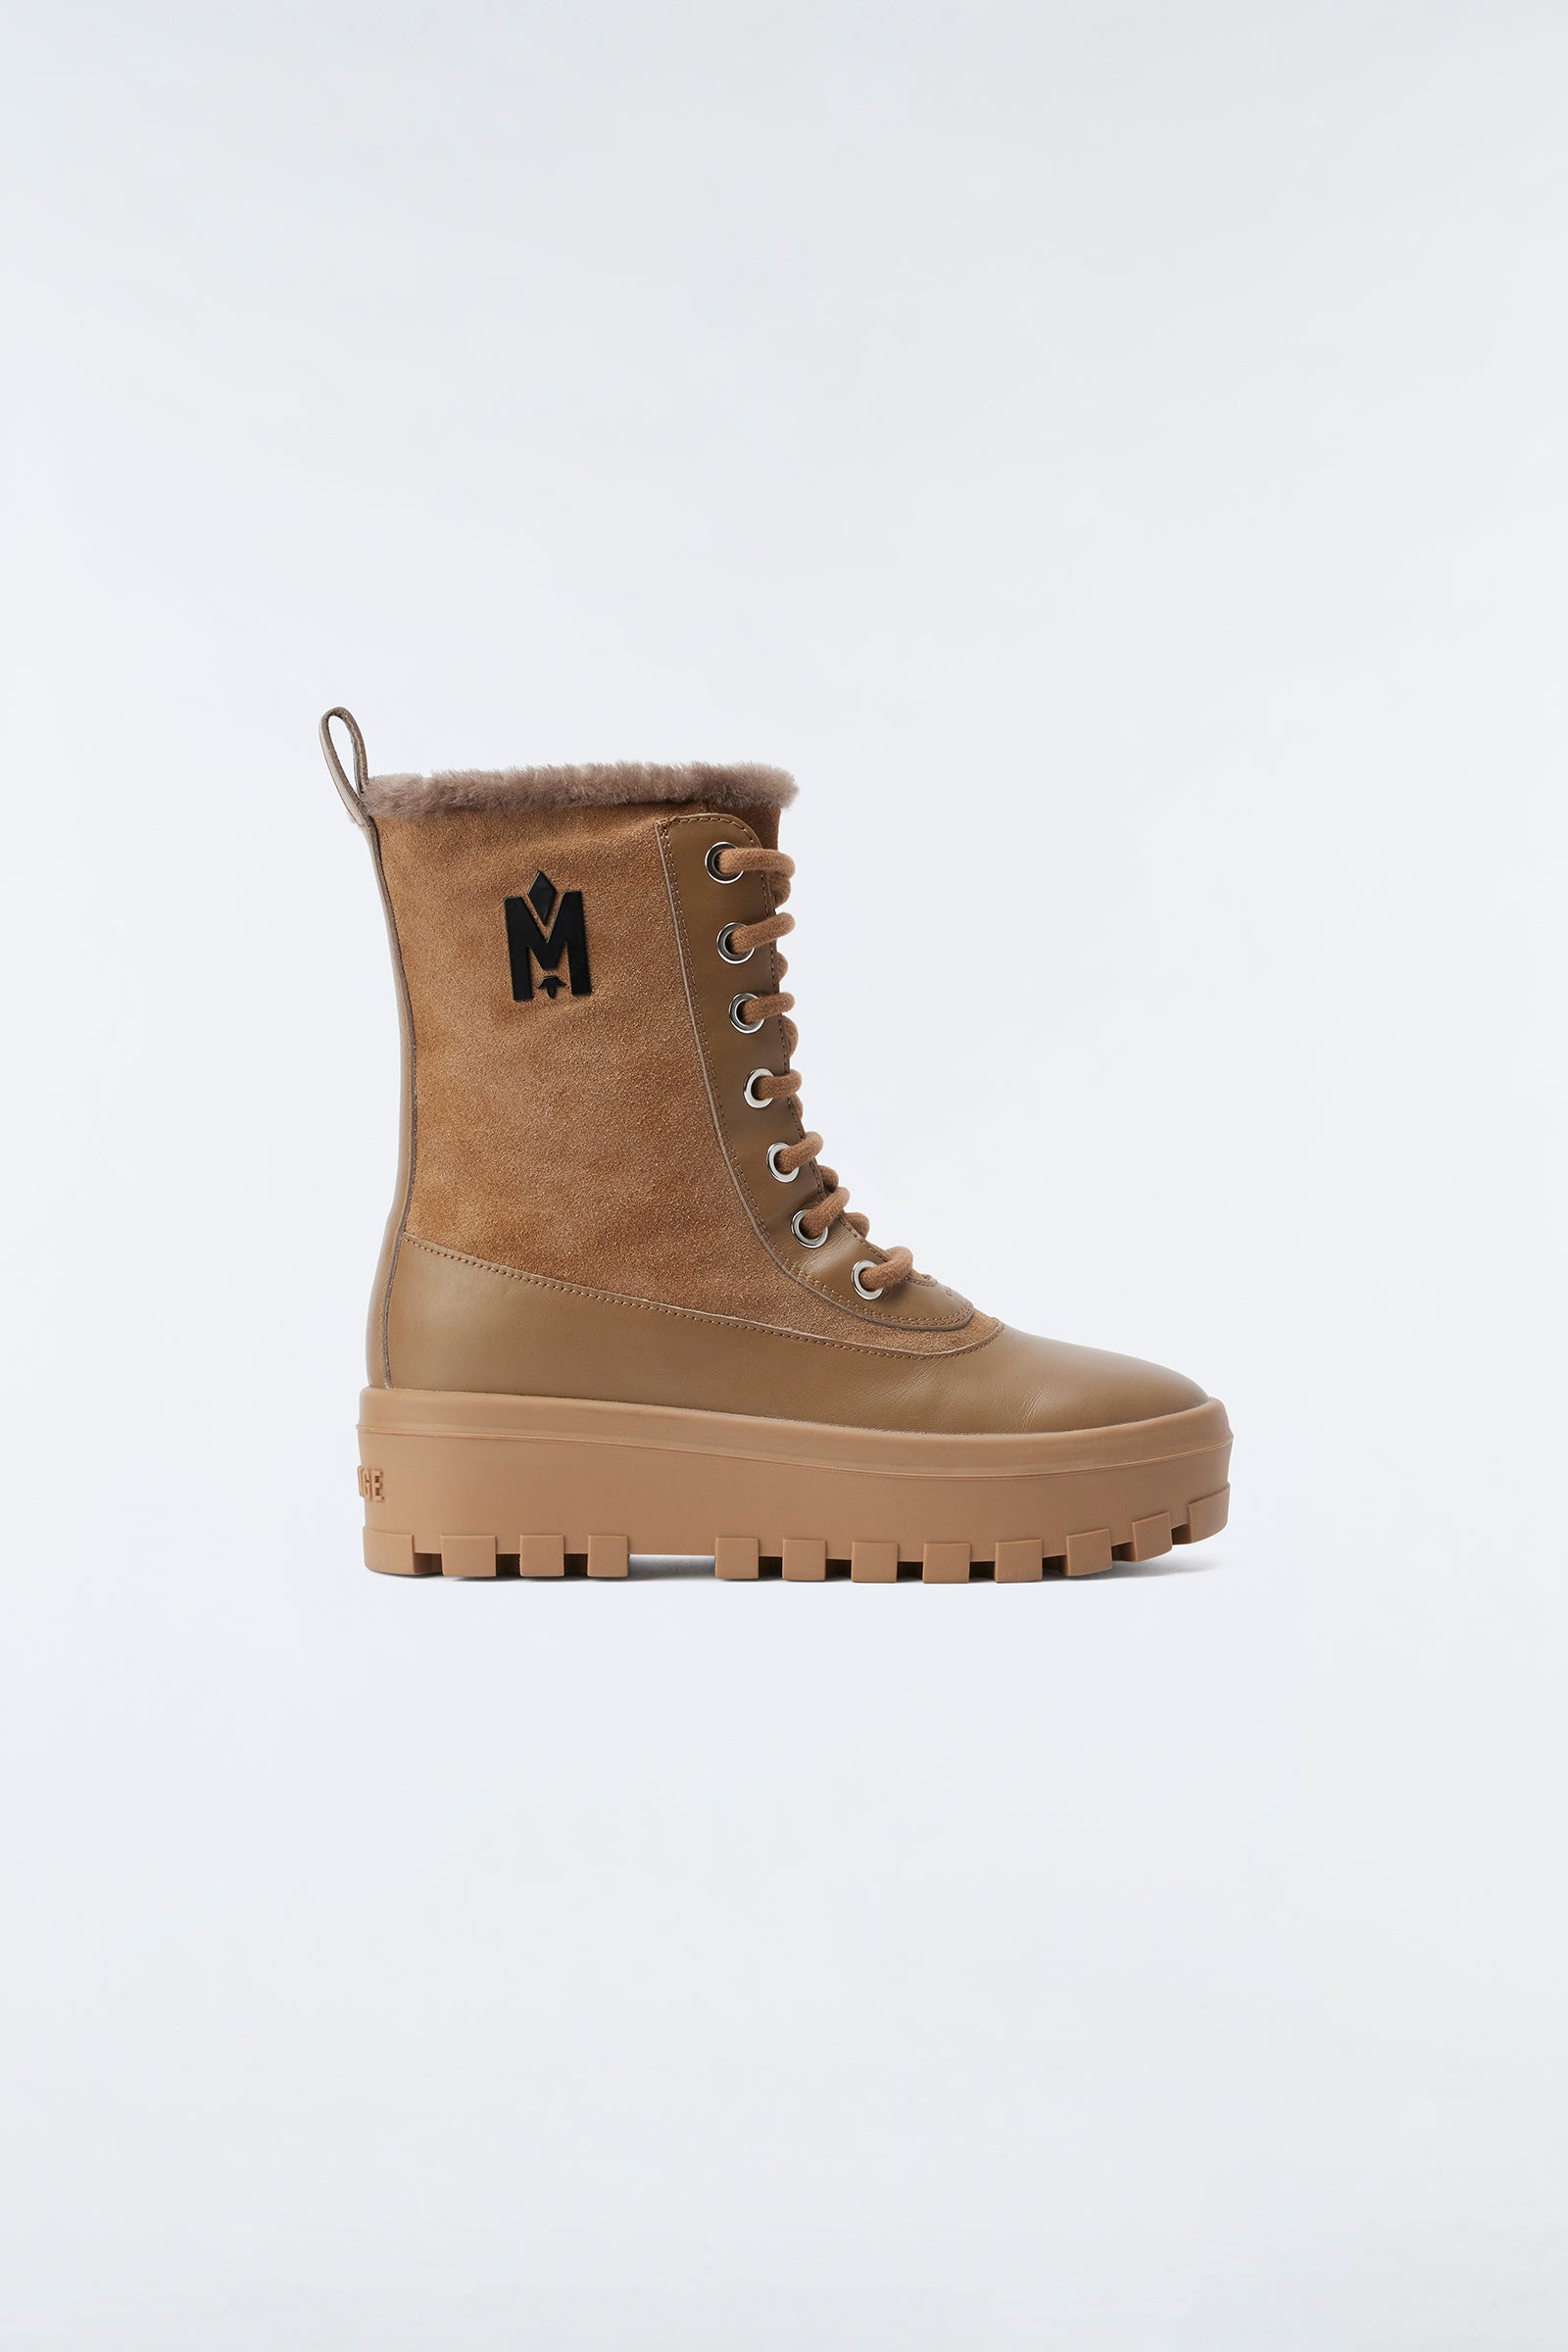 Hero, Shearling-lined lamb suede winter boot for ladies | Mackage® US